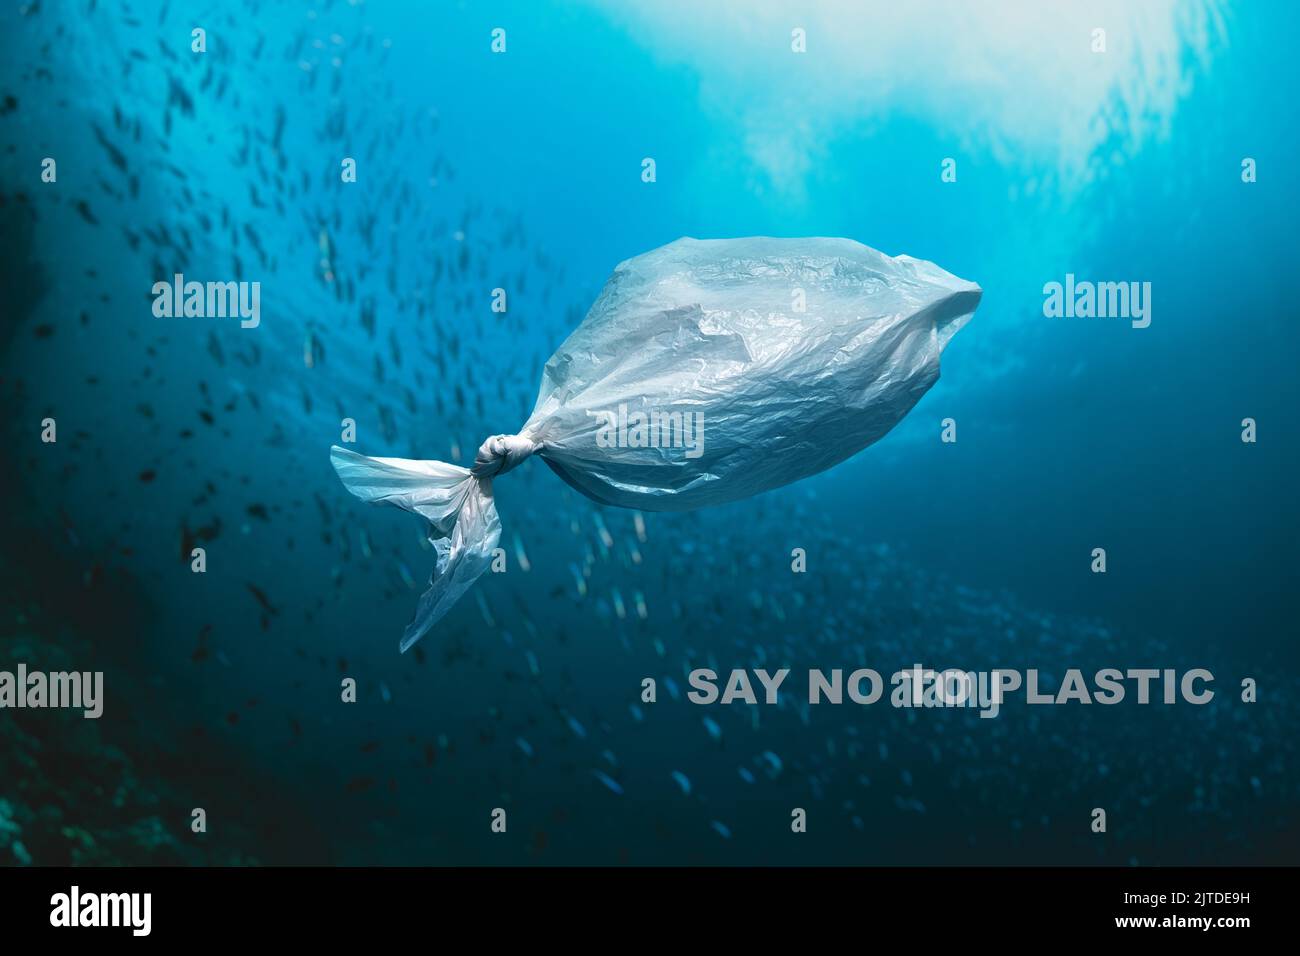 Plastic bag floating in the ocean - SAY NO TO PLASTIC Stock Photo